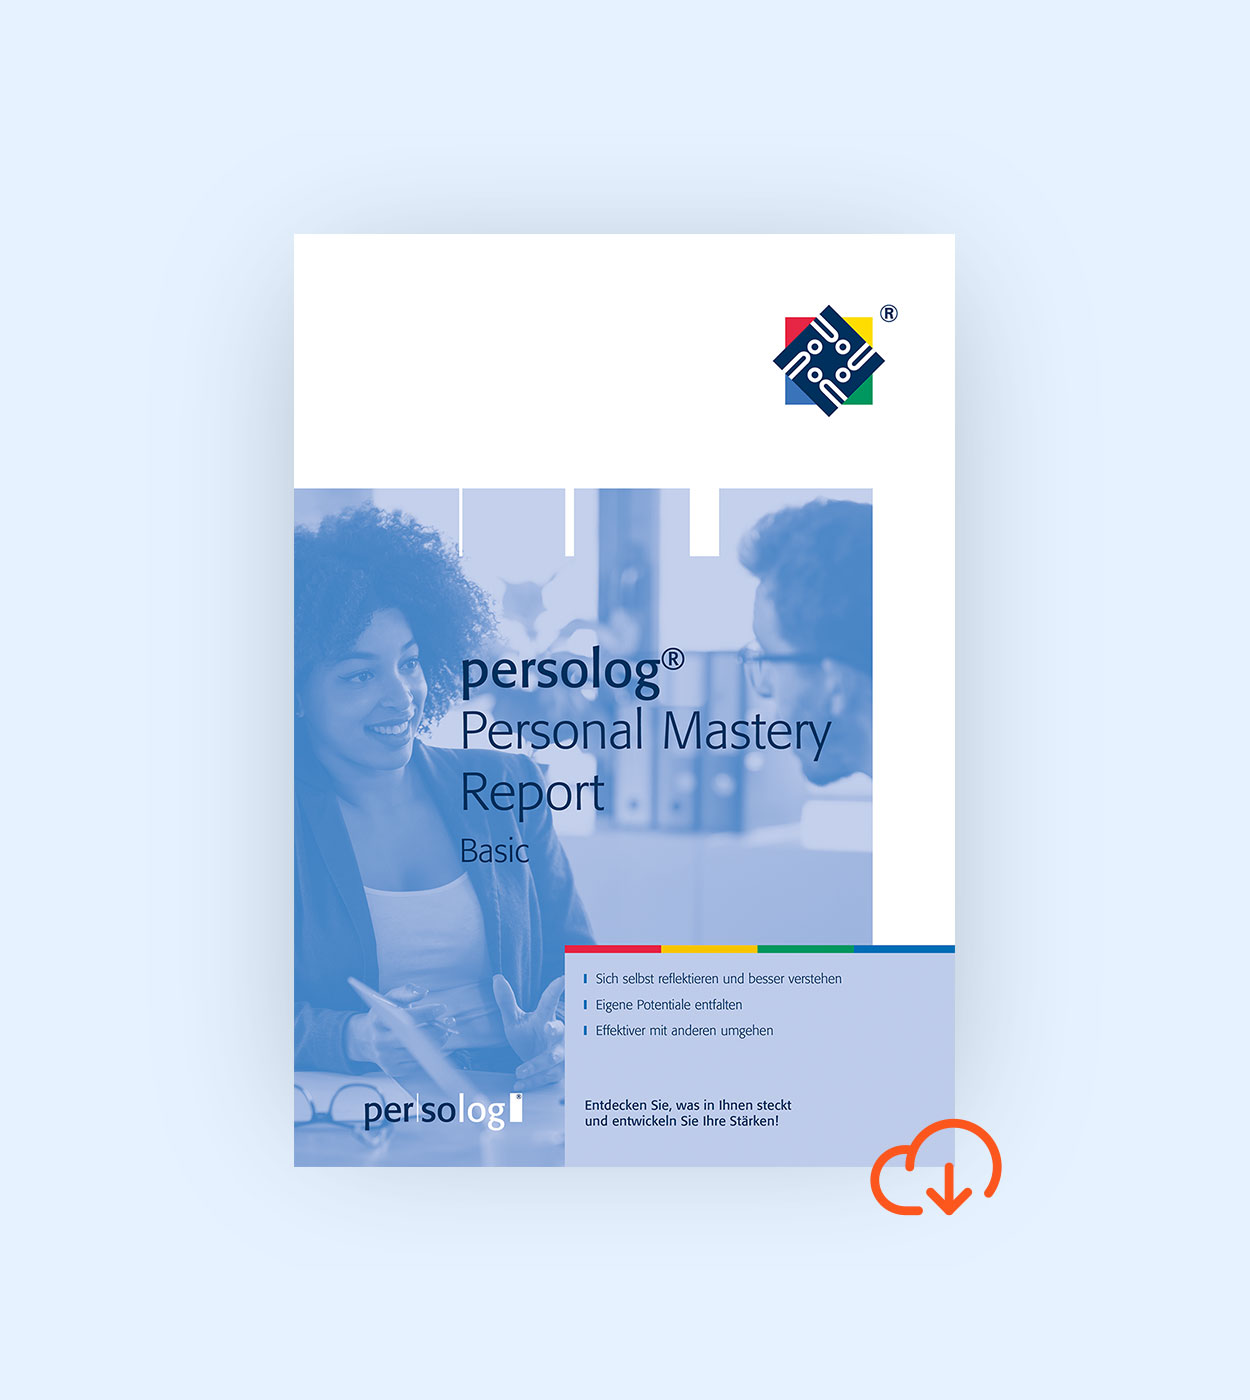 persolog® Personal Mastery Report online